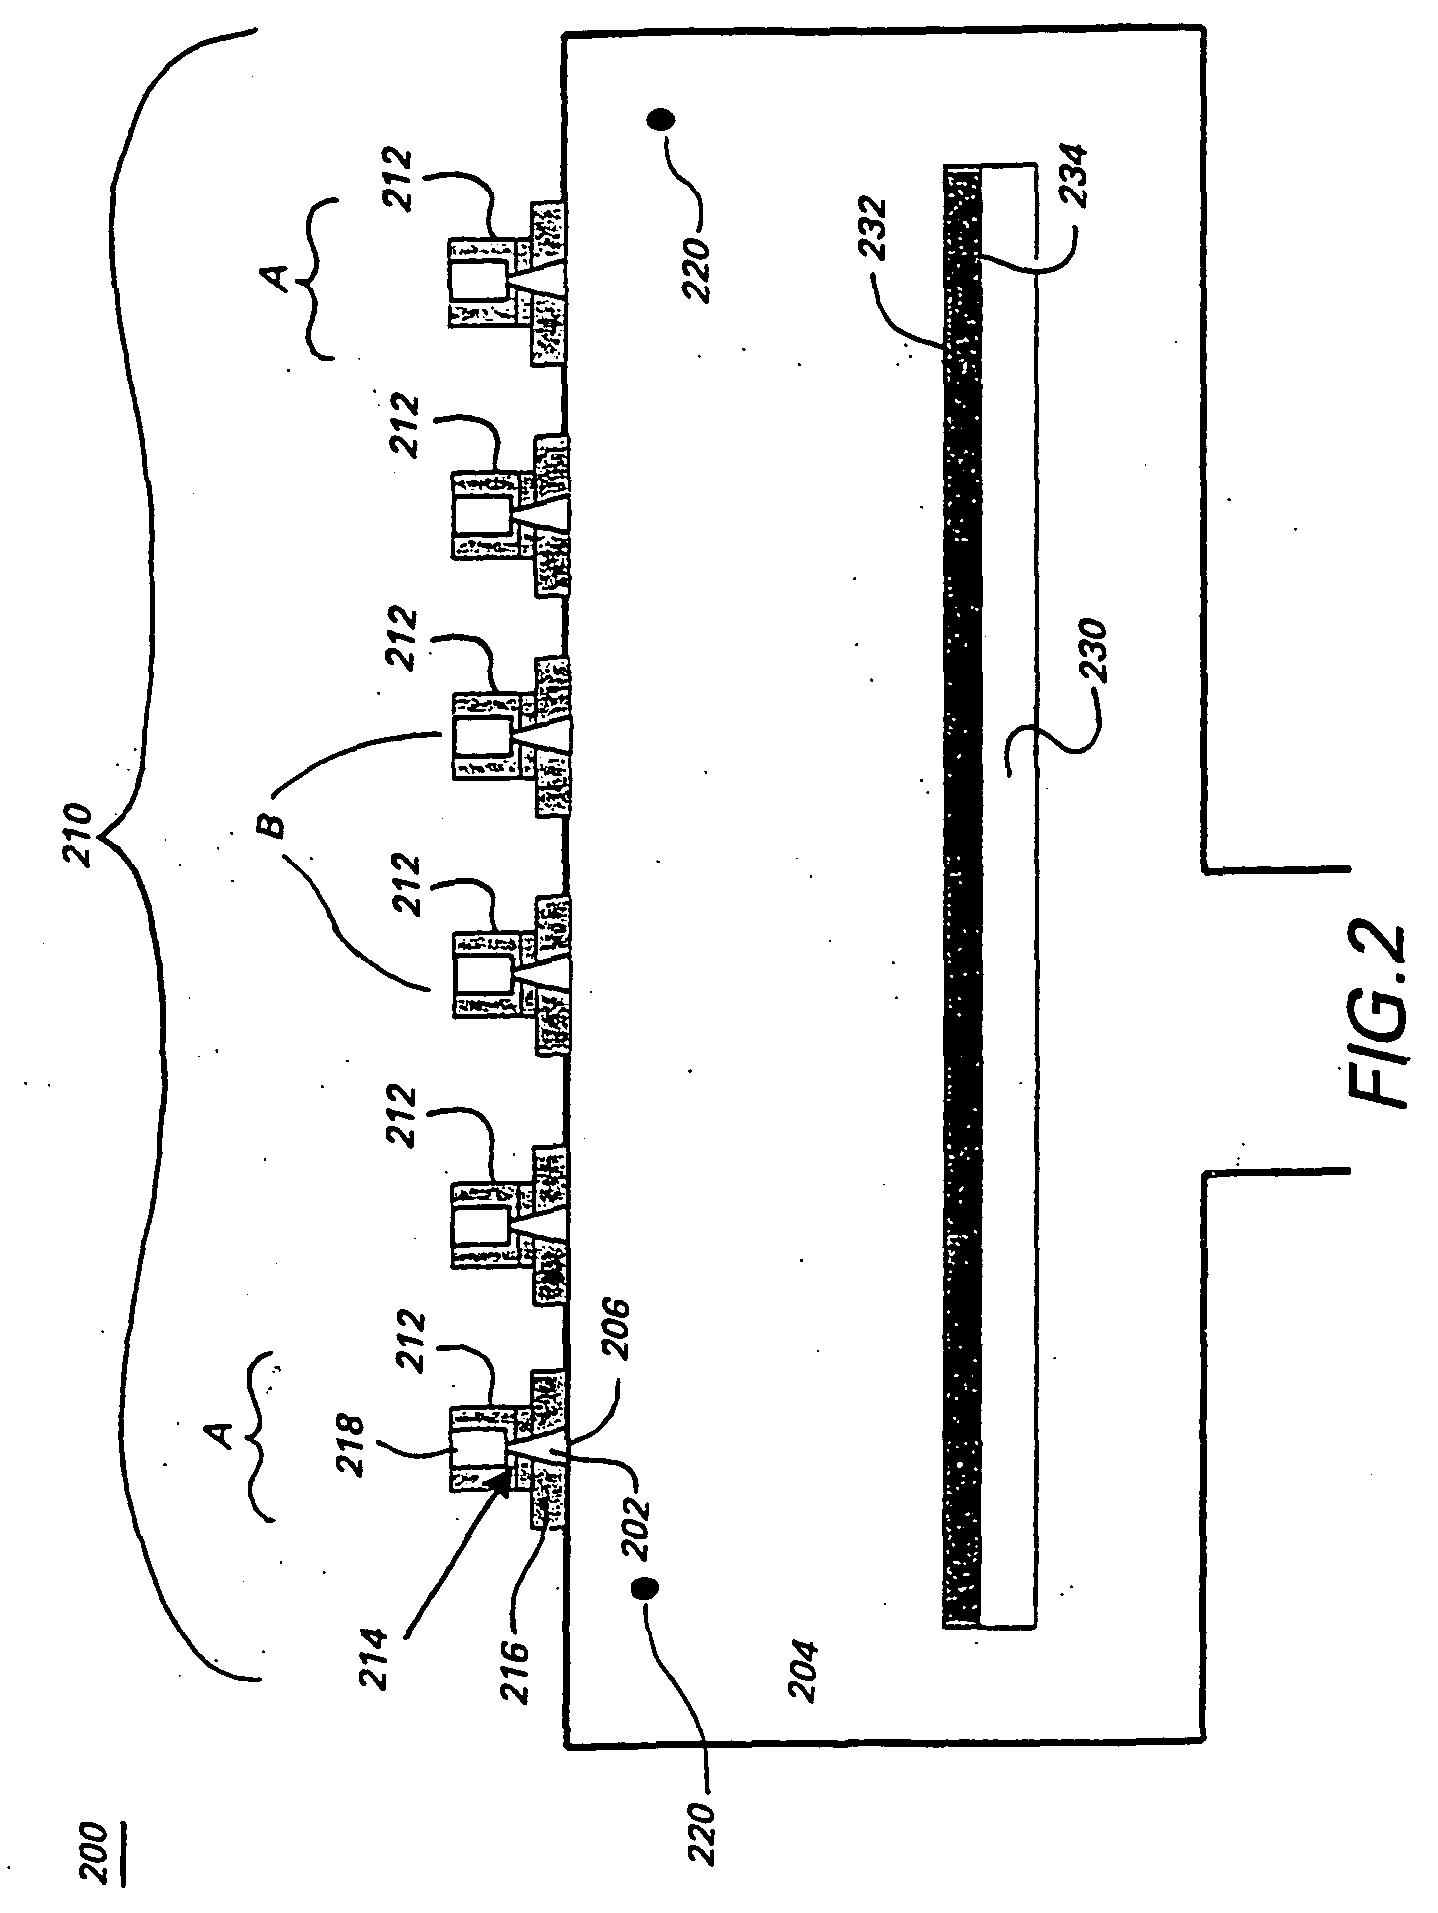 Apparatus and method for depositing large area coatings on planar surfaces